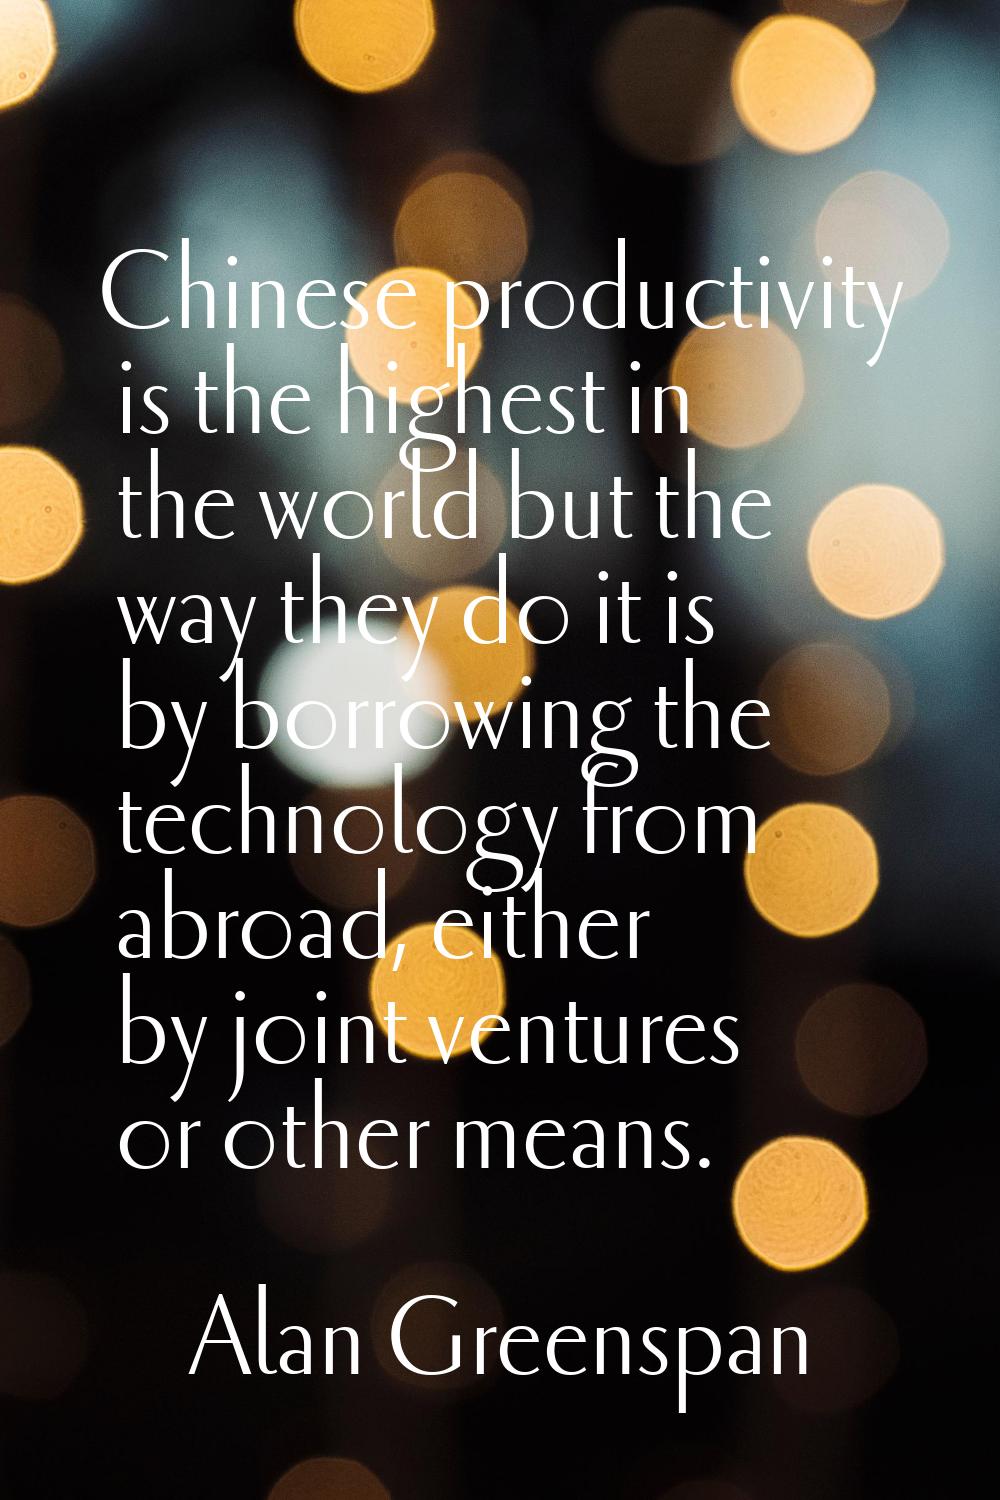 Chinese productivity is the highest in the world but the way they do it is by borrowing the technol